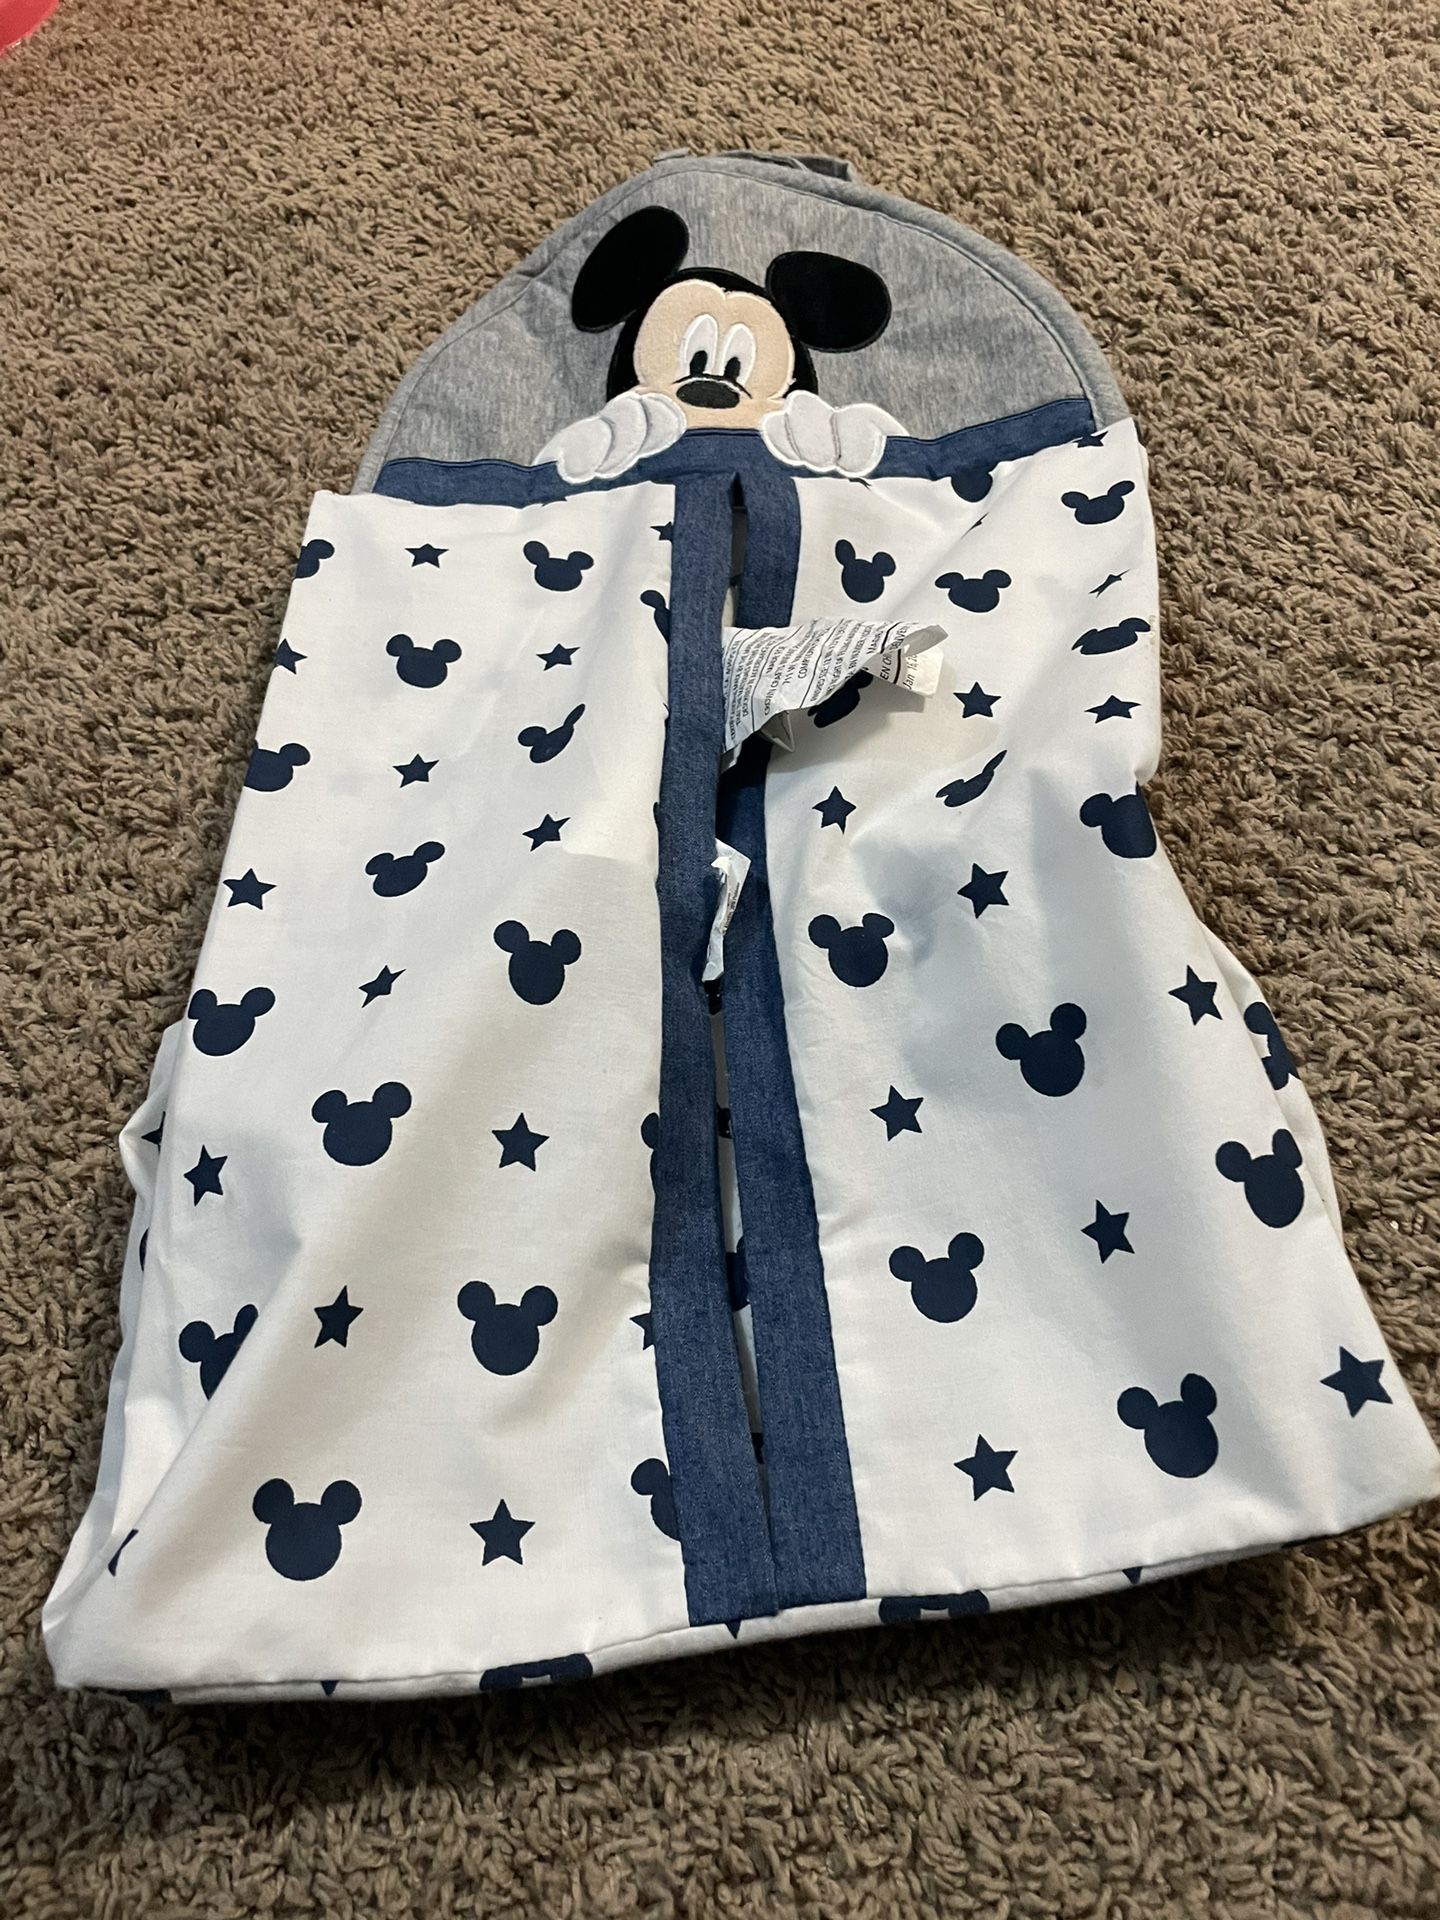 Mickey Mouse Diaper Caddy